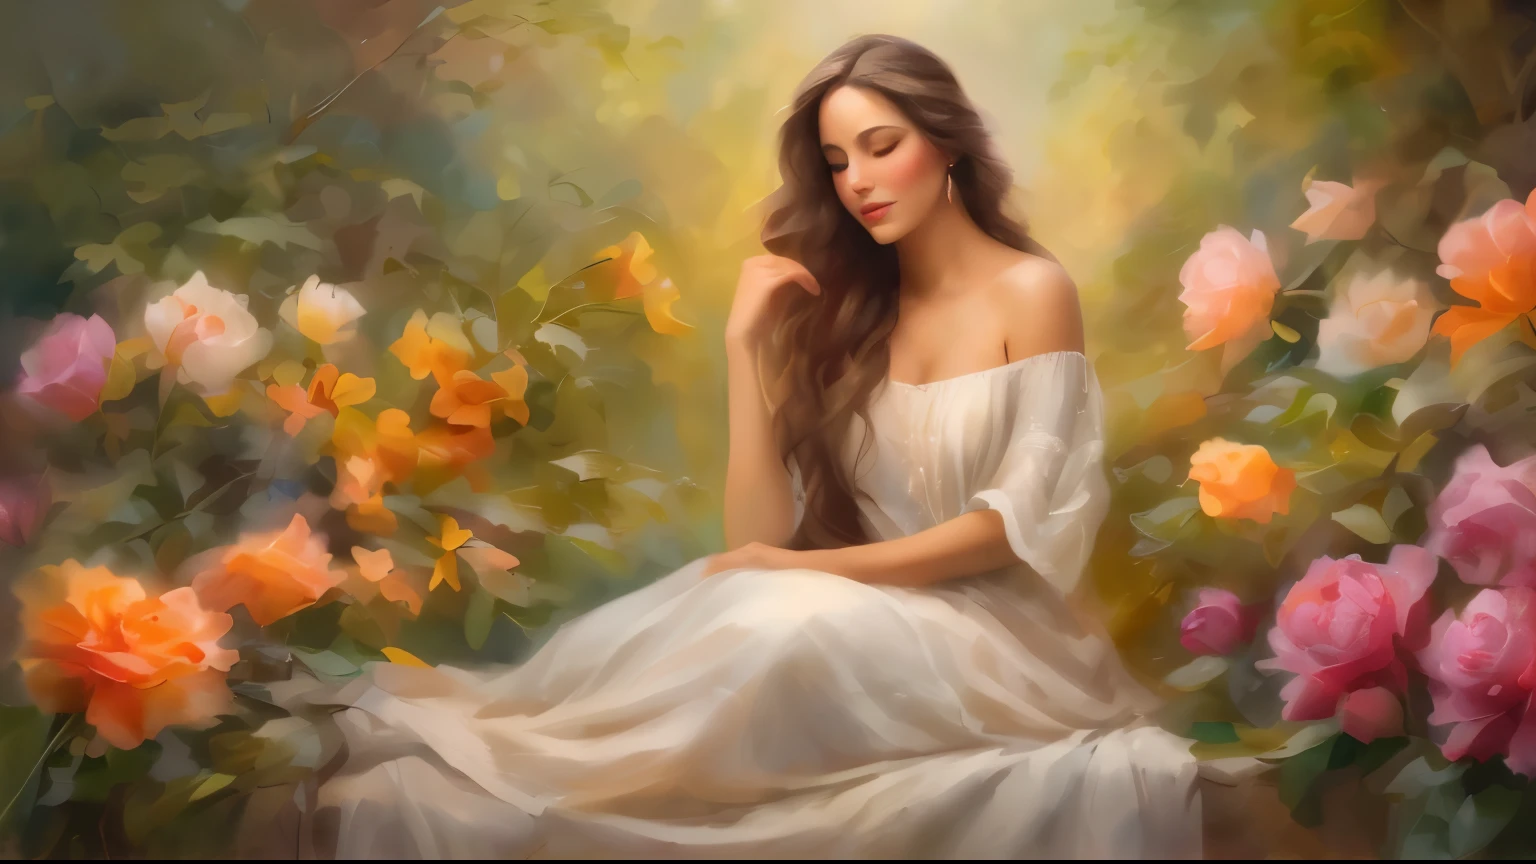 beautiful woman about thirty, topless, with mesmerizing eyes, Long flowing hair, and a confident facial expression. She is sitting in a bright and colorful garden., surrounded by lush greenery and blooming flowers. Sunlight penetrates through the leaves, creating a soft and ethereal atmosphere. woman&#39;skin flawless and glowing, with a healthy glow. Her posture is relaxed, one hand rests on her knee, and the other gently touches the flower petal. The scene is captured in a dreamy and painterly style.., reminiscent of a Renaissance portrait or an impressionist masterpiece. Colors are bright and rich, with a warm and cozy color palette. The lighting is soft and diffused, give a woman a gentle glow&#39;face and highlighting the subtle details of her features. Highest overall image quality, with ultra-detailed textures and realistic rendering. The painting radiates a feeling of peace.., Femininity, and timeless beauty.
